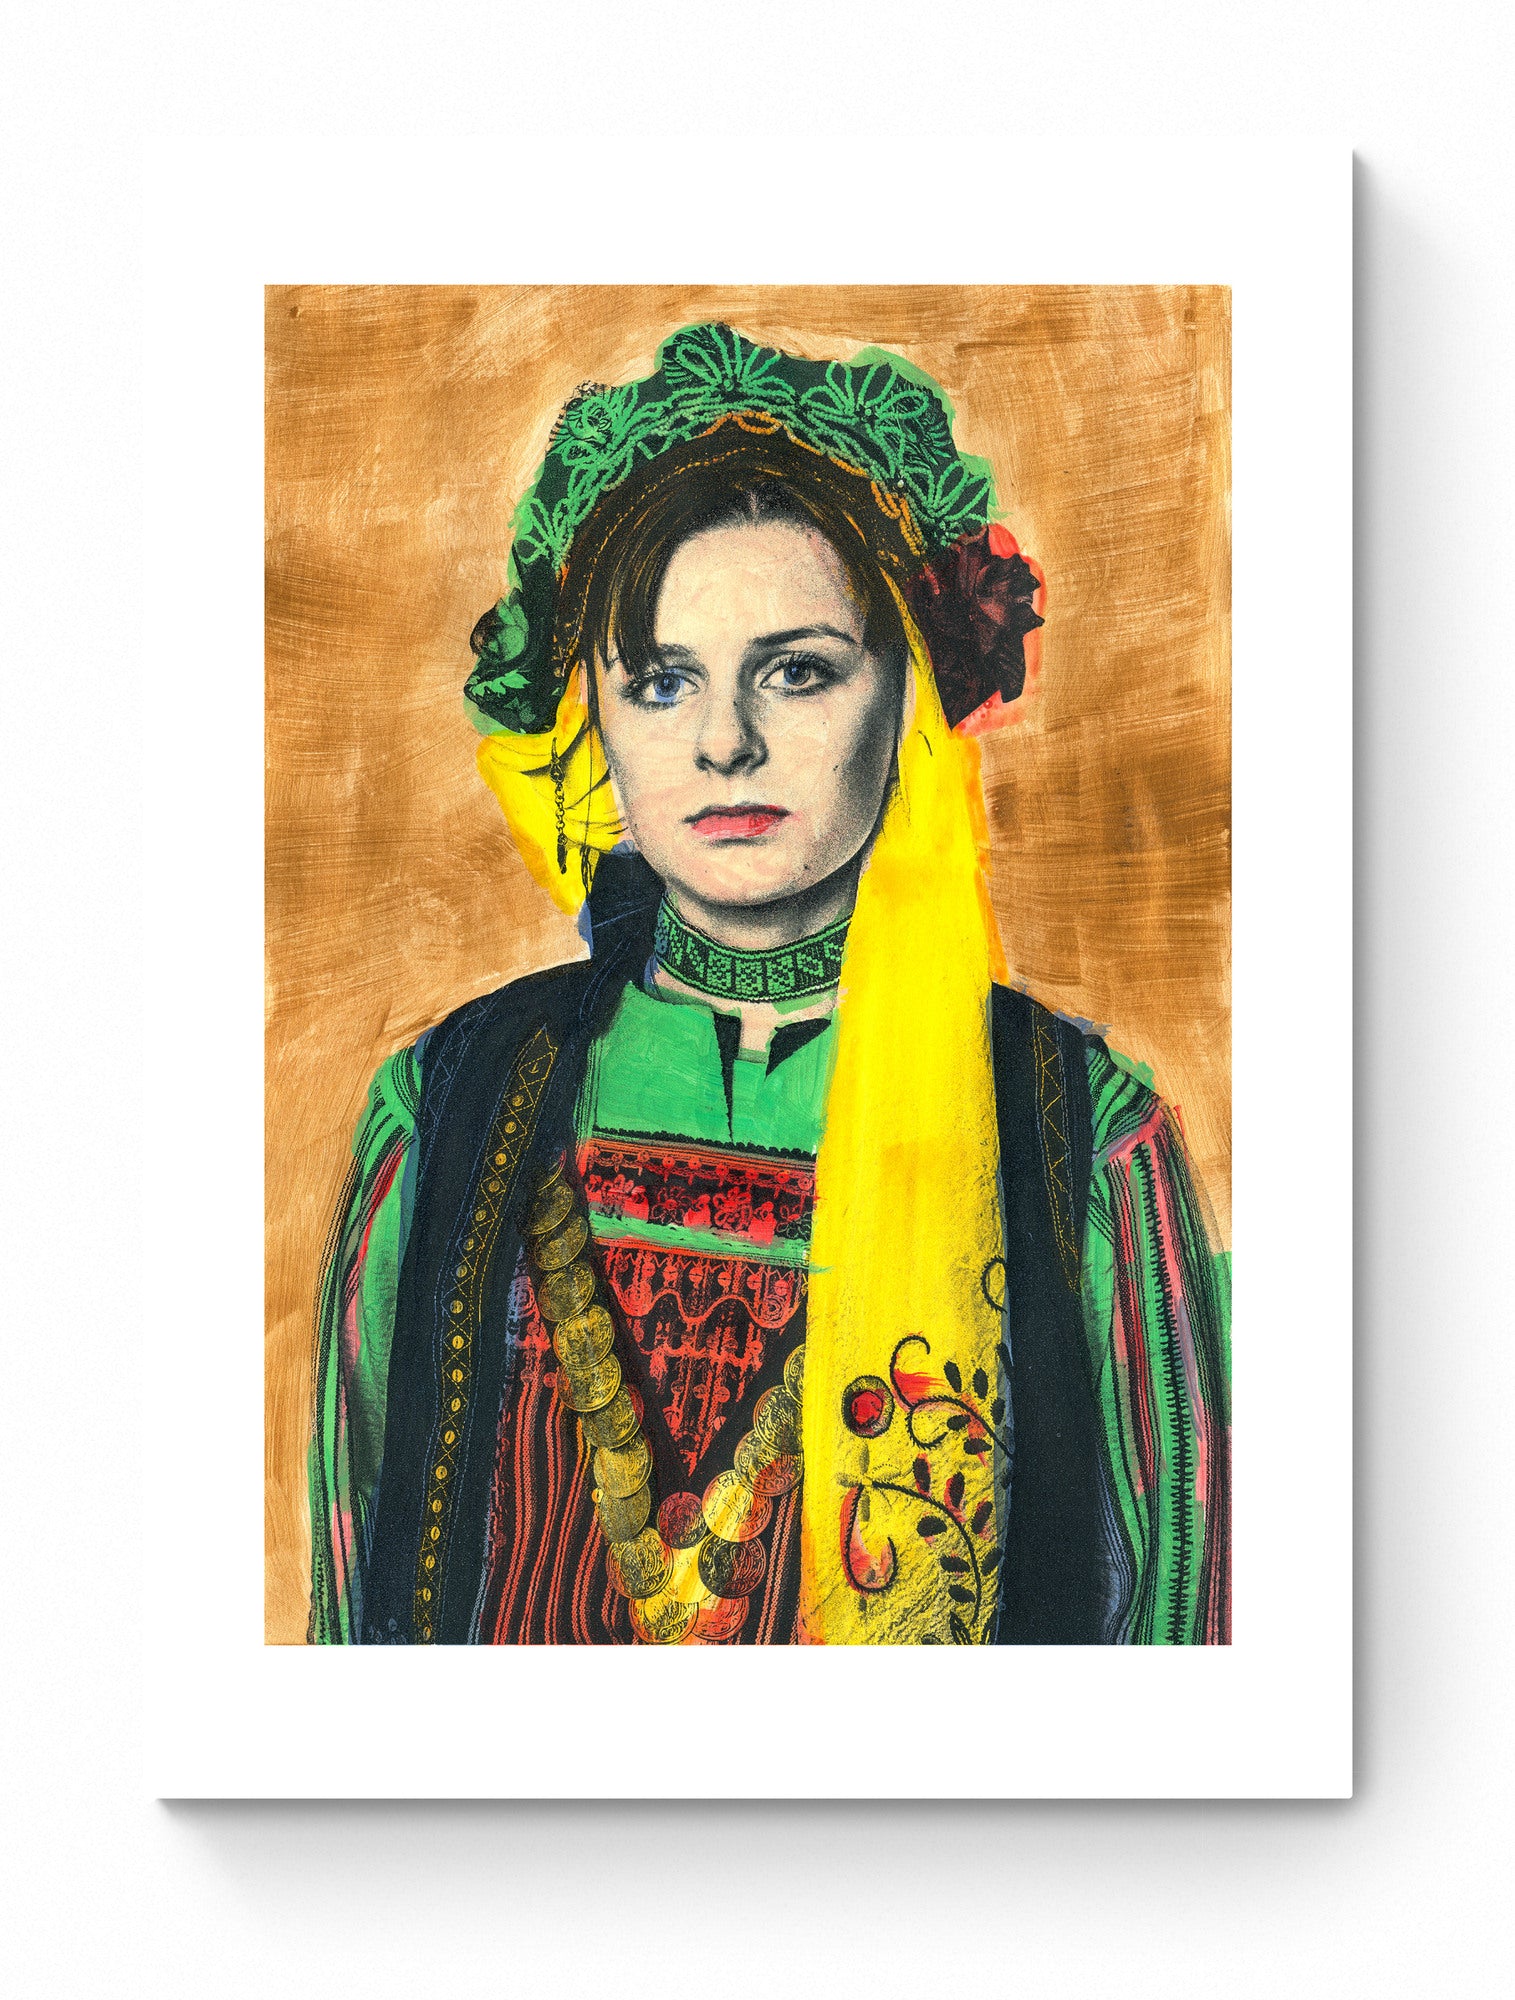 Painting Pop Art Wall Art from Greece | Brown Metaxades Costume from Evros, Thrace, by George Tatakis - poster